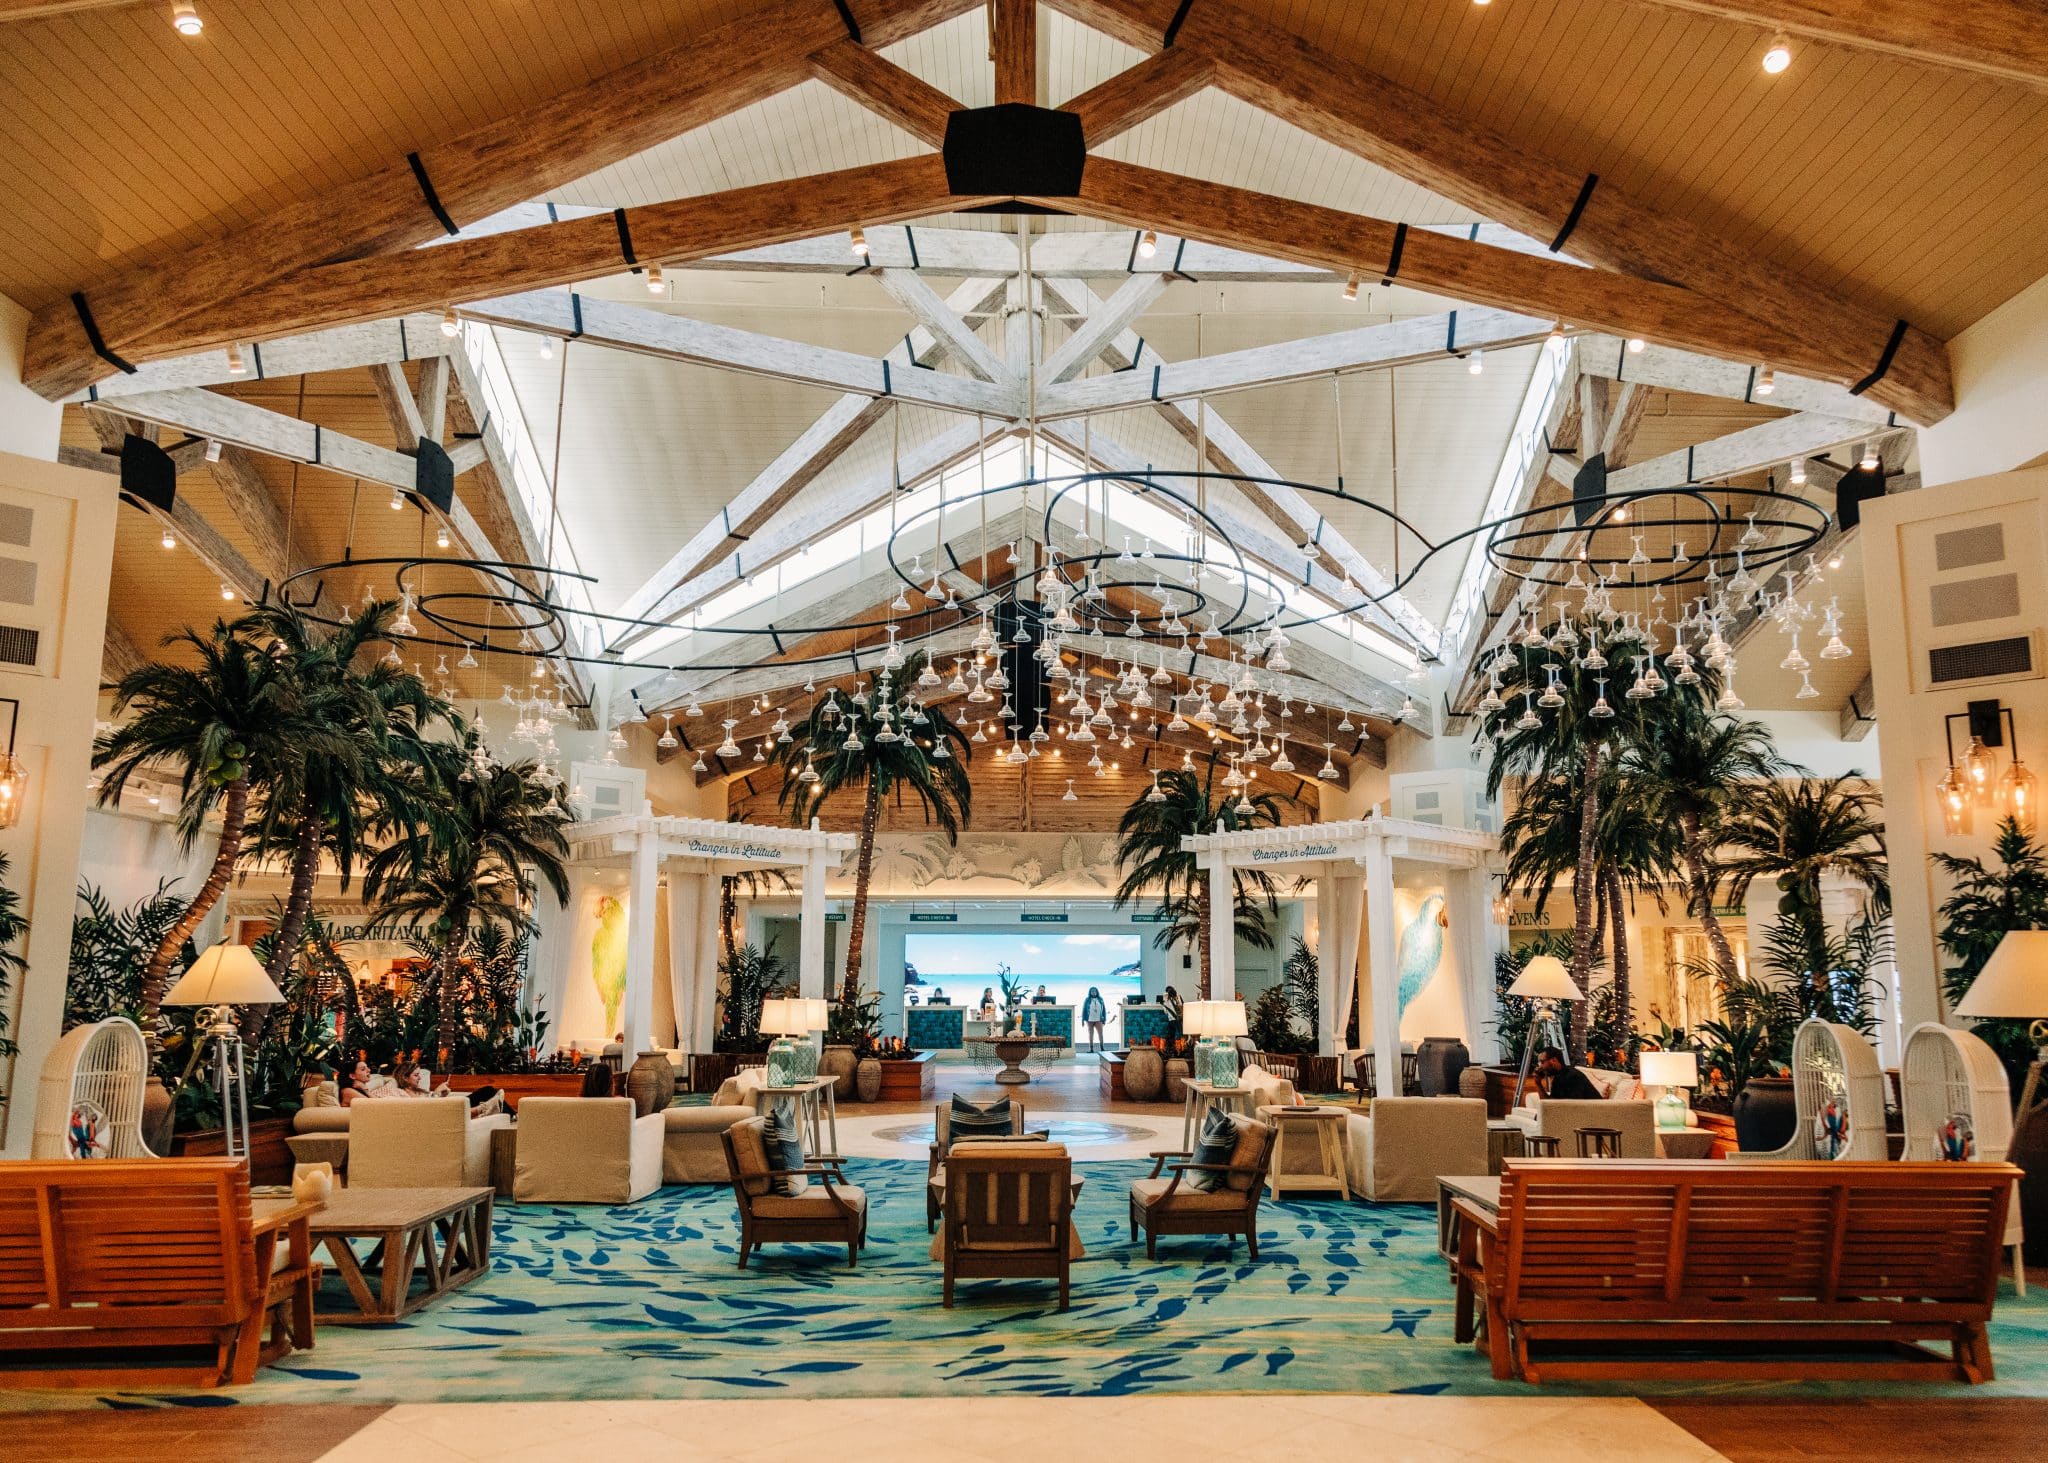 lobby picture of margaritaville resort orlando with palm trees and market lights with large sky light window in the middle and couches and chairs setup